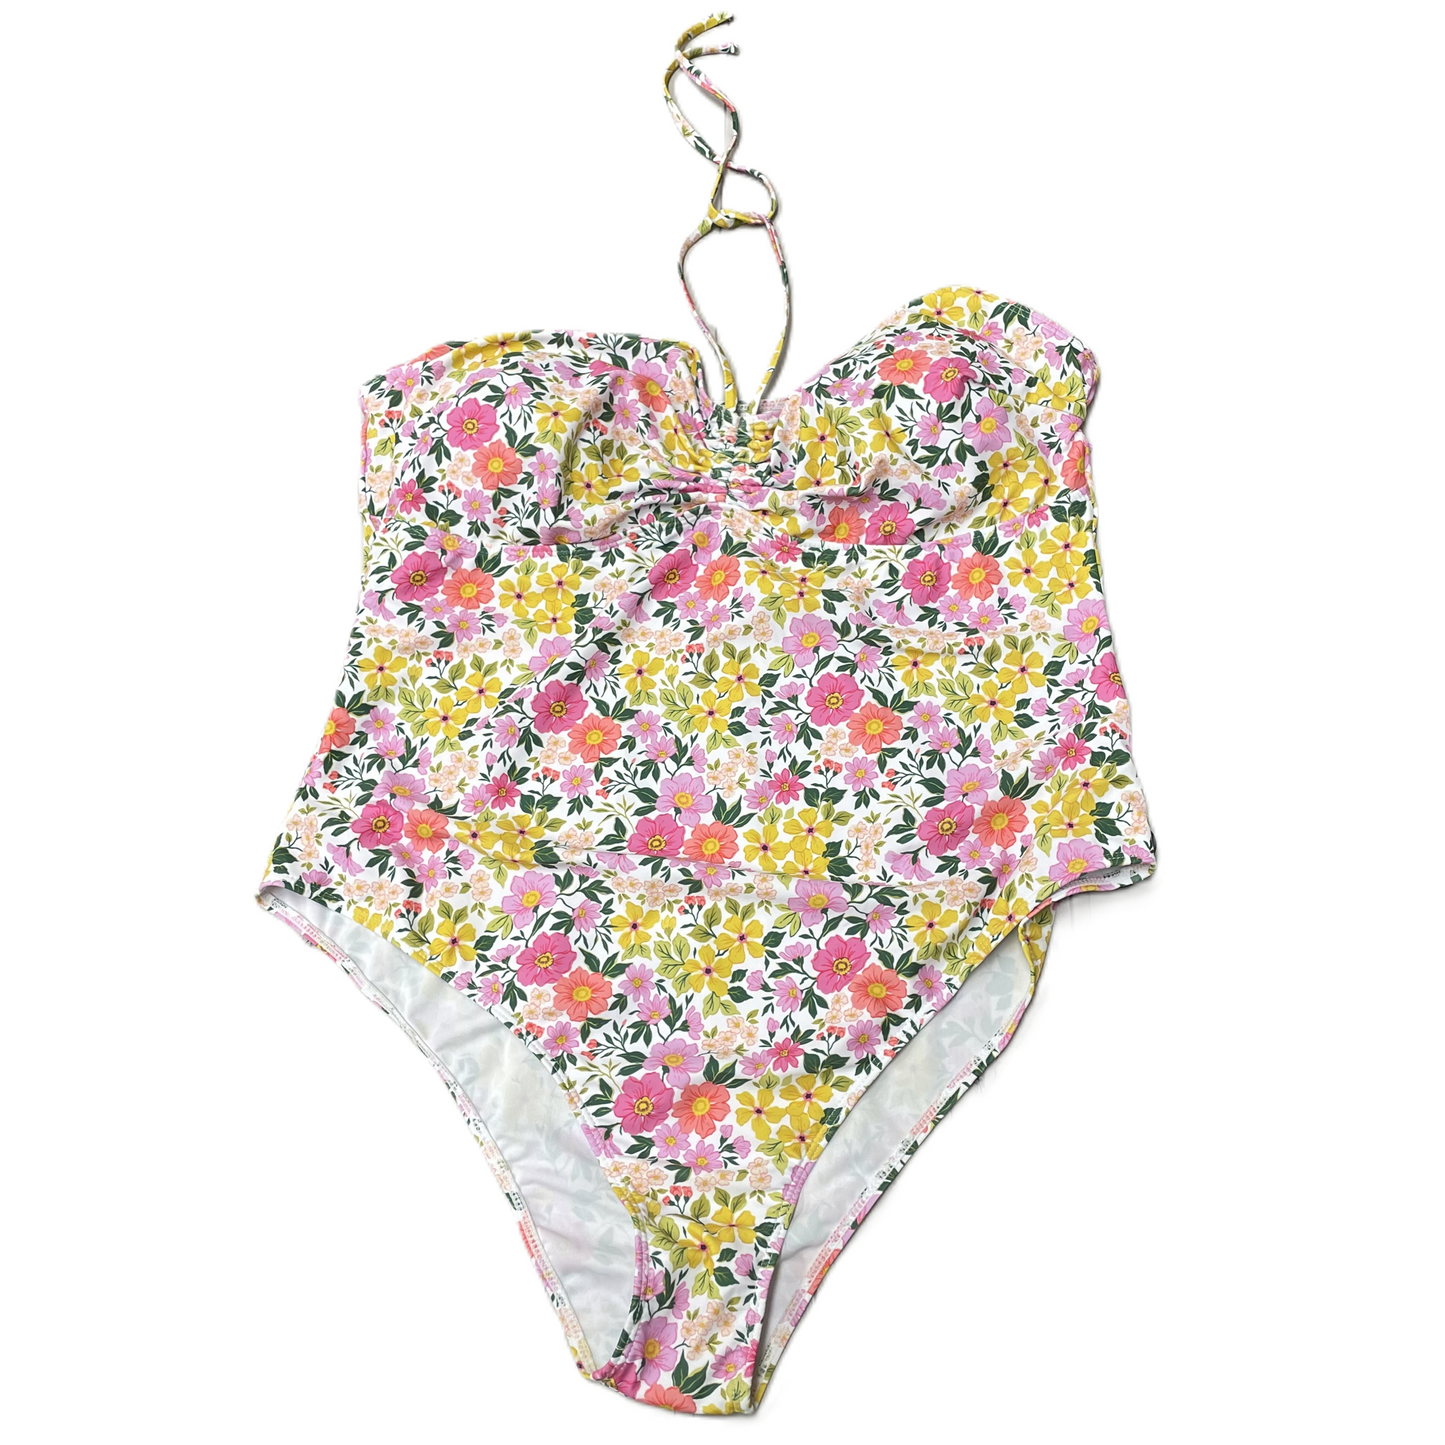 Floral Swimsuit By Shein, Size: 4x